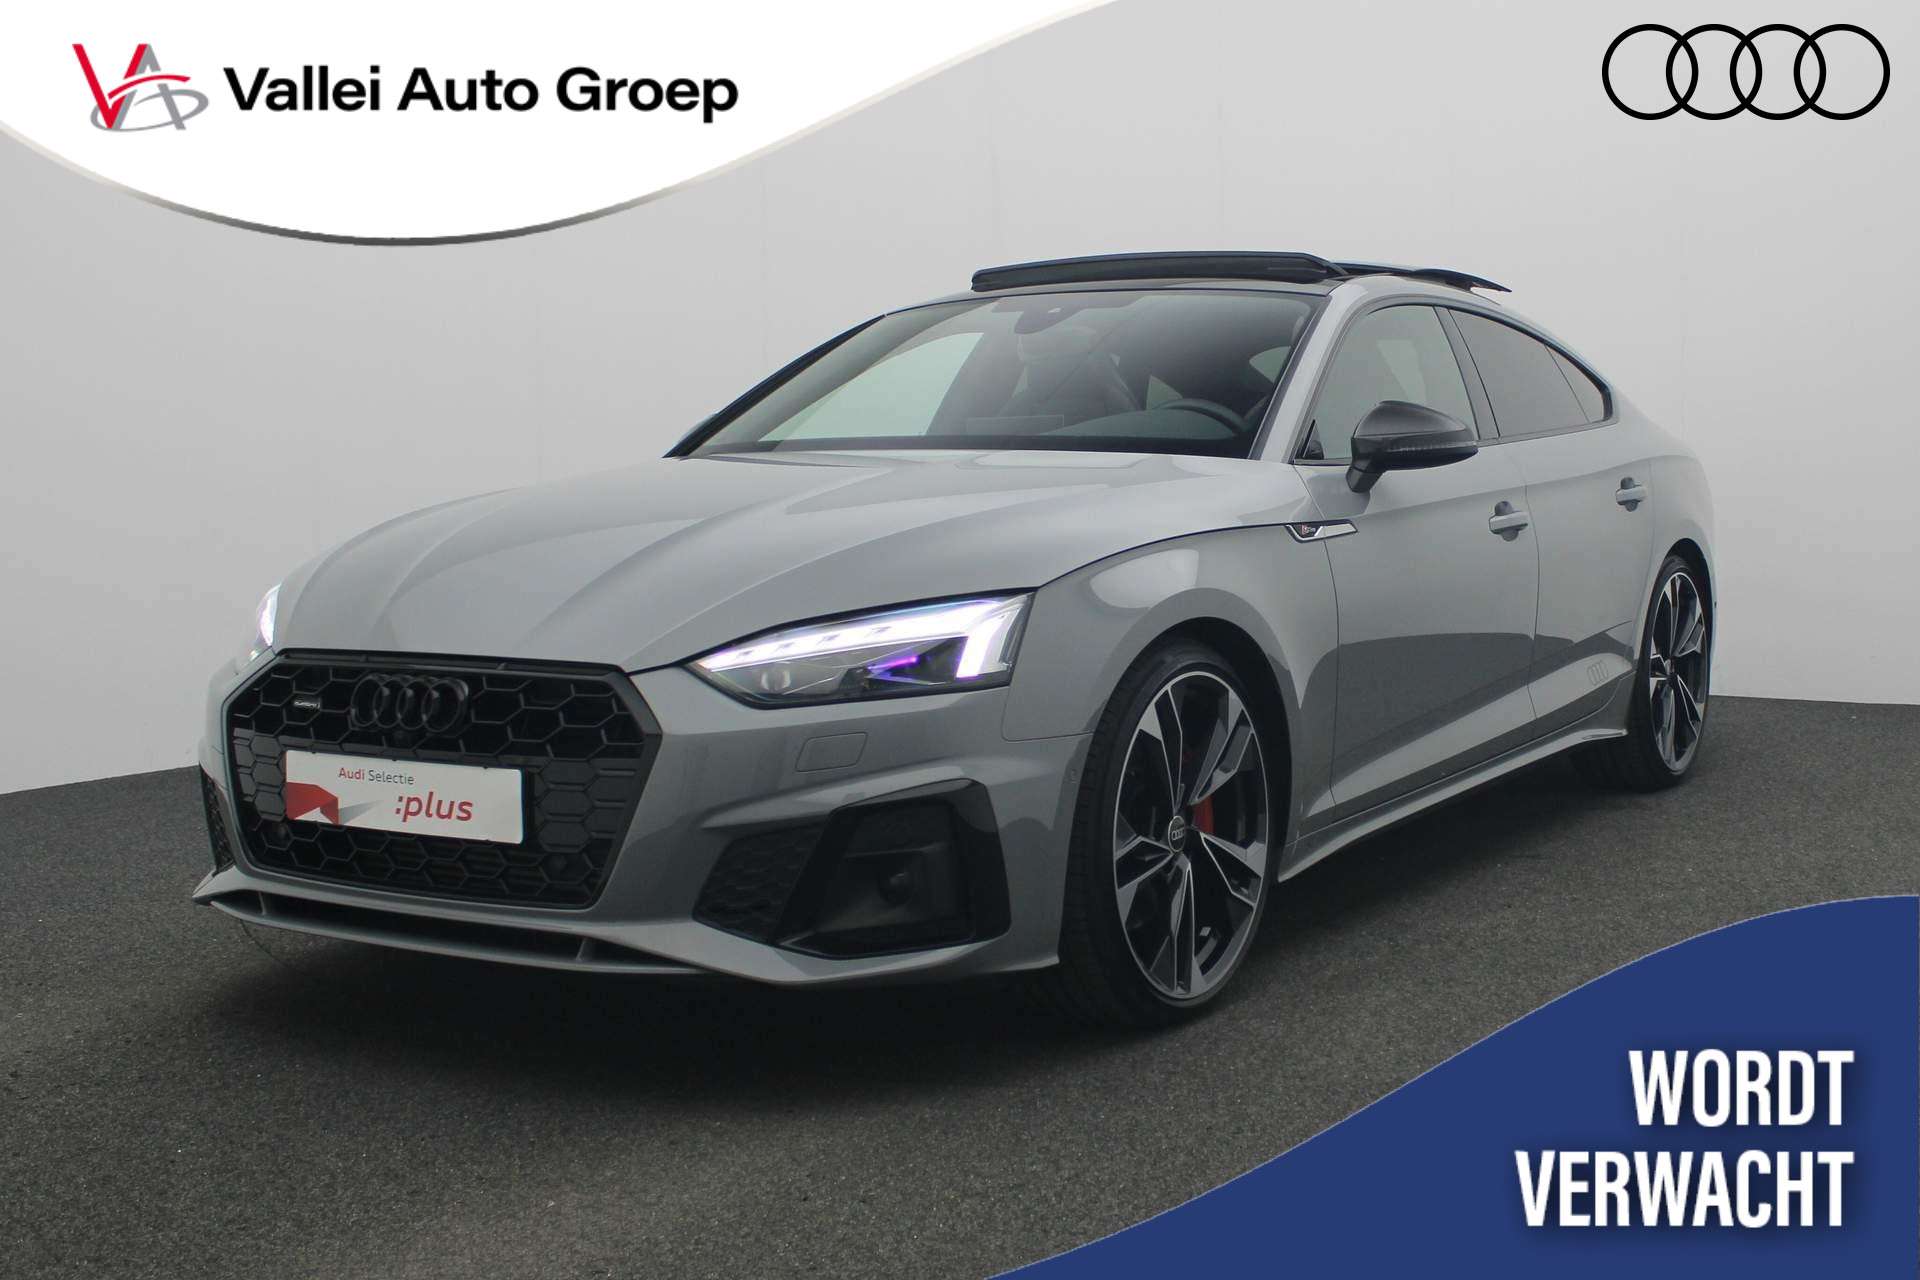 Audi A5 Compact in Grey used in VELP for € 59,250.-